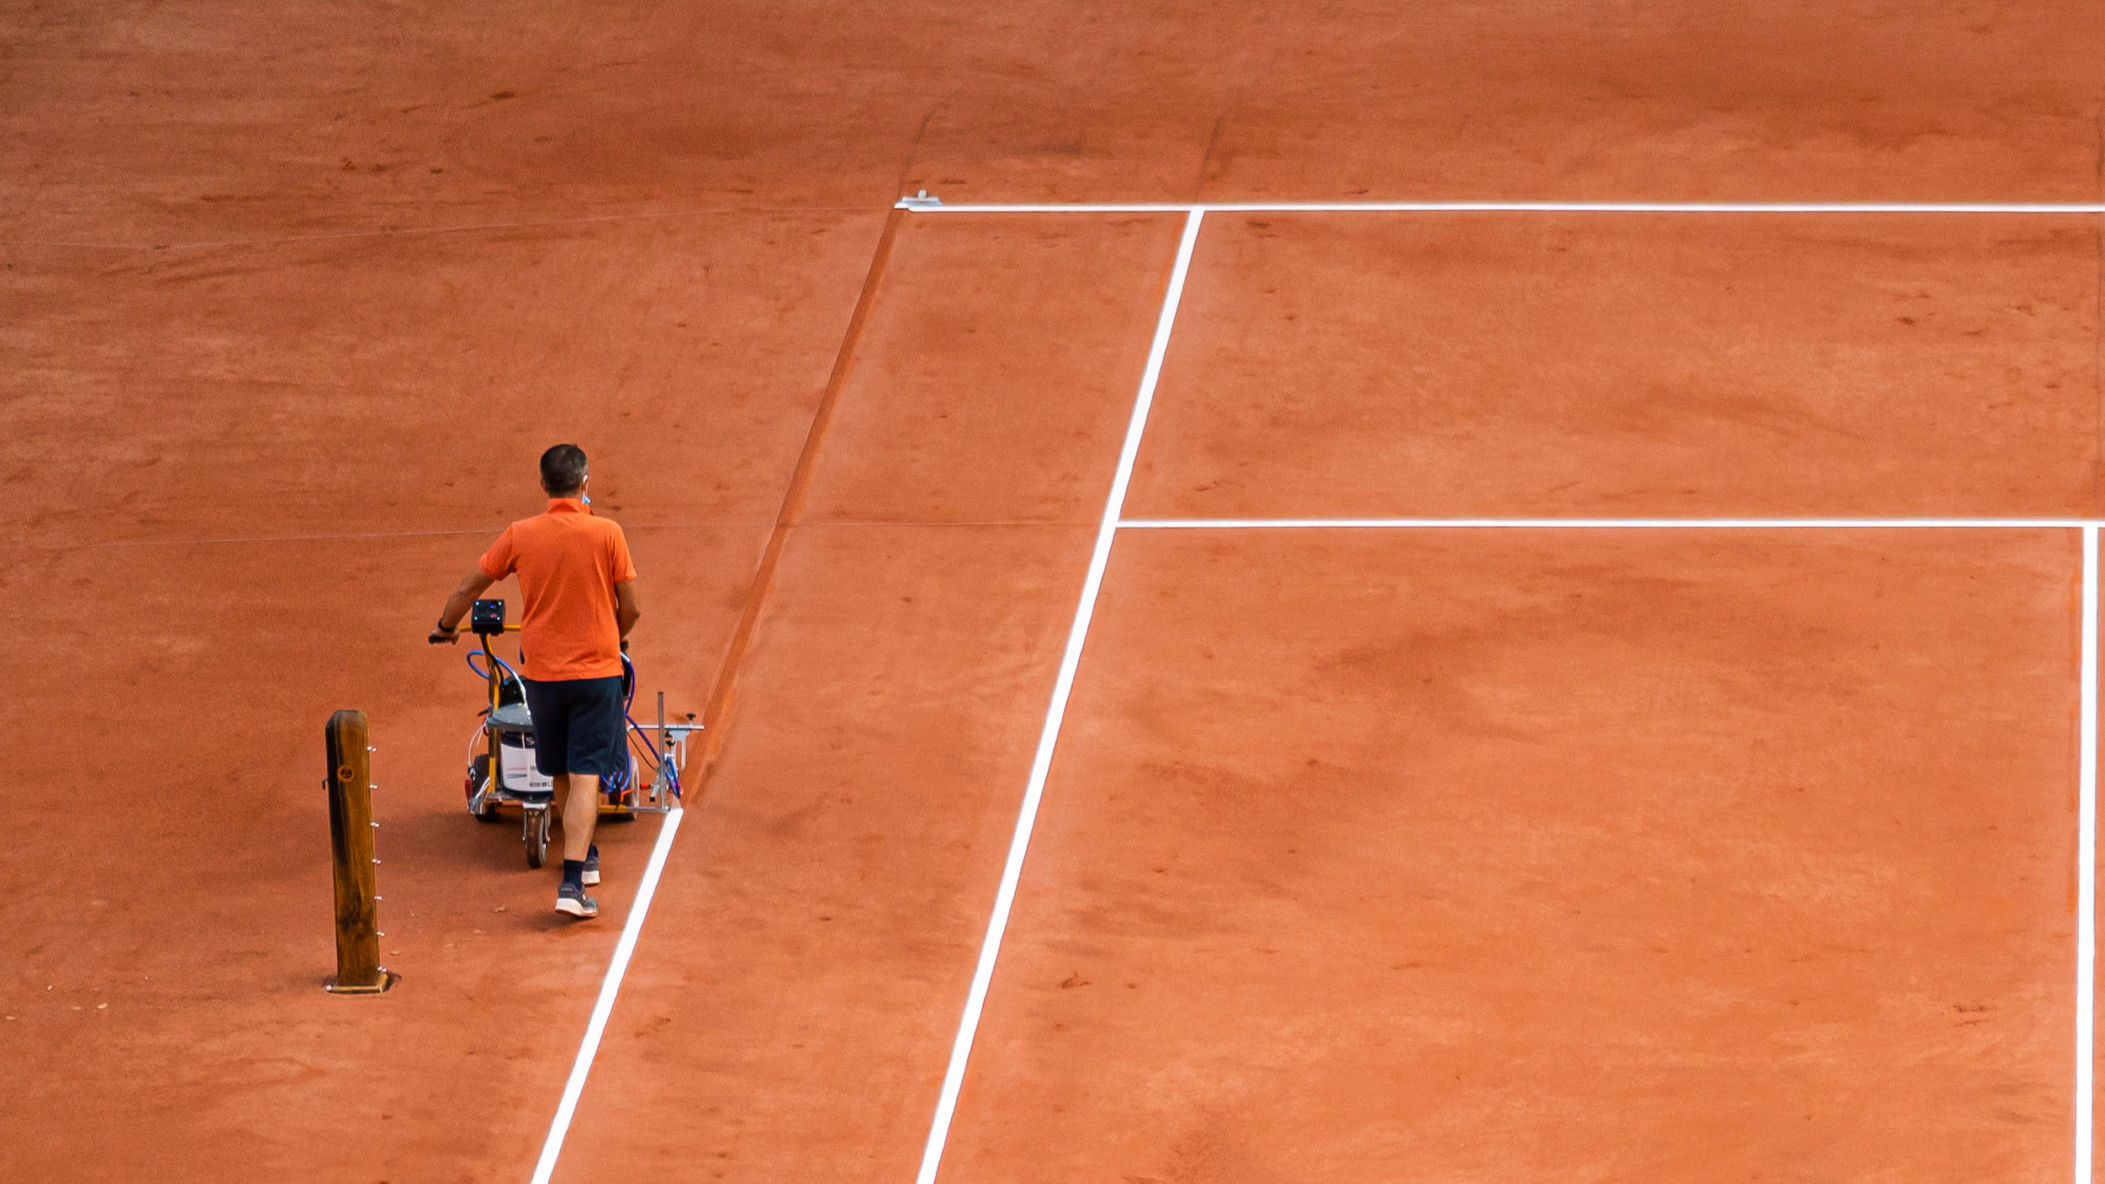 French Open attendance reduced to 5,000 fans per day